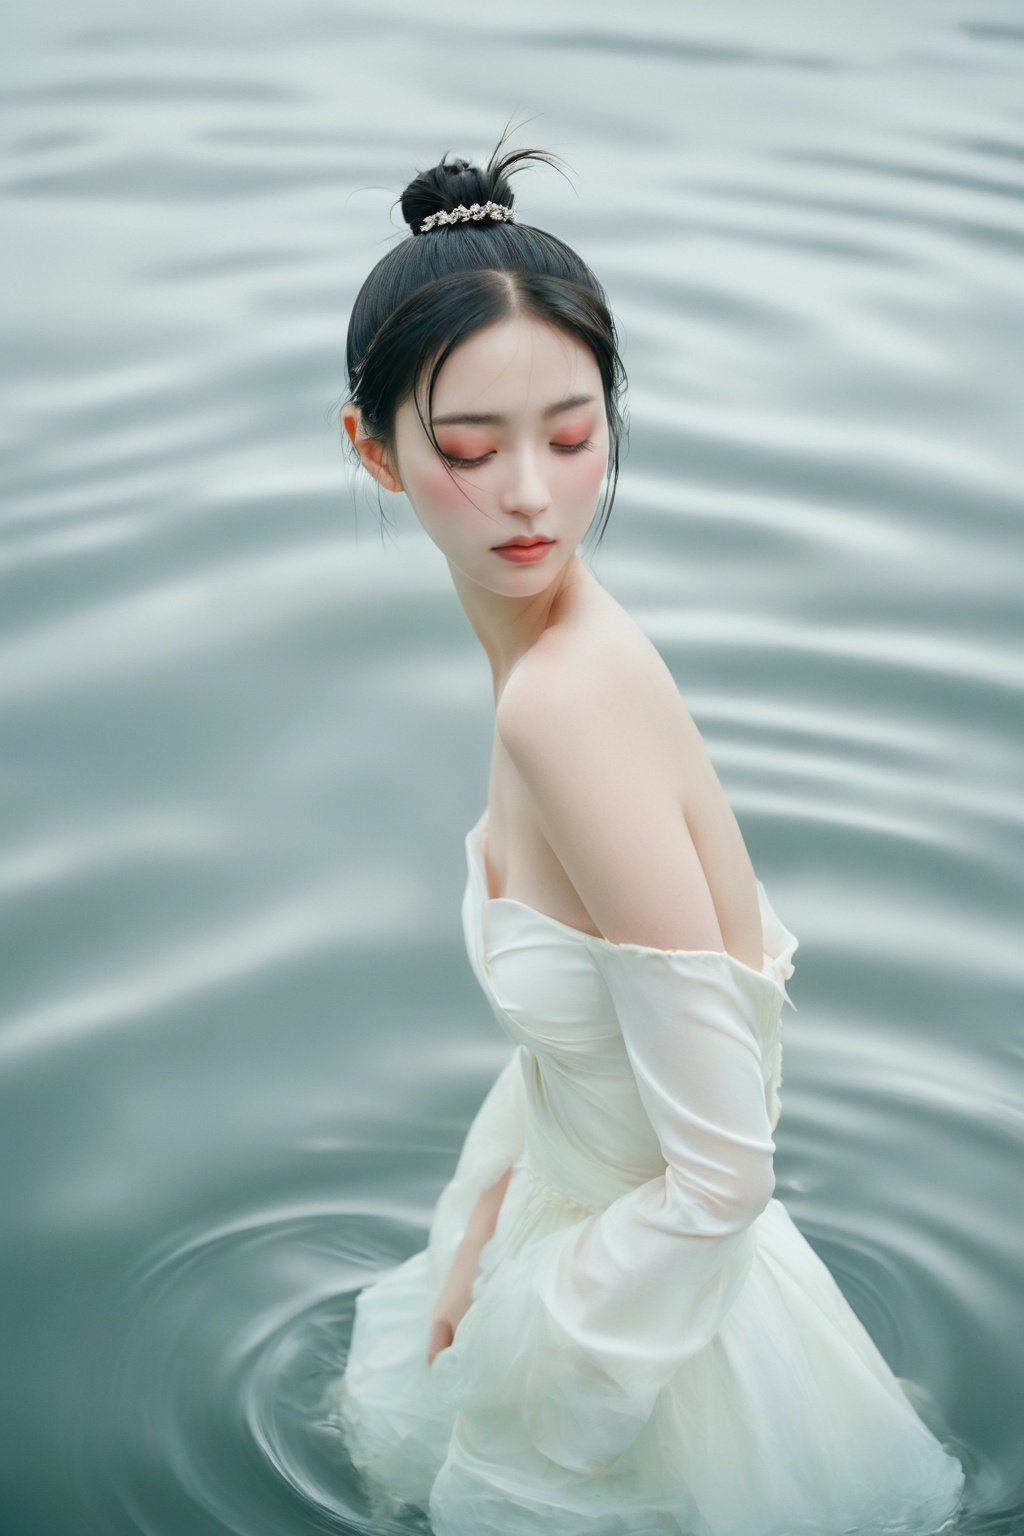  analog film photo A black-haired girl, wearing a white dress, with a single hair bun adorned with a hairpin, her eyes closed, standing alone on the water surface, reflecting her image. She is a fair-skinned female, revealing her collarbone and bare shoulders as she faces the viewer, against a light gray background in a minimalist style. . faded film, desaturated, 35mm photo, grainy, vignette, vintage, Kodachrome, Lomography, stained, highly detailed, found footage, realistic